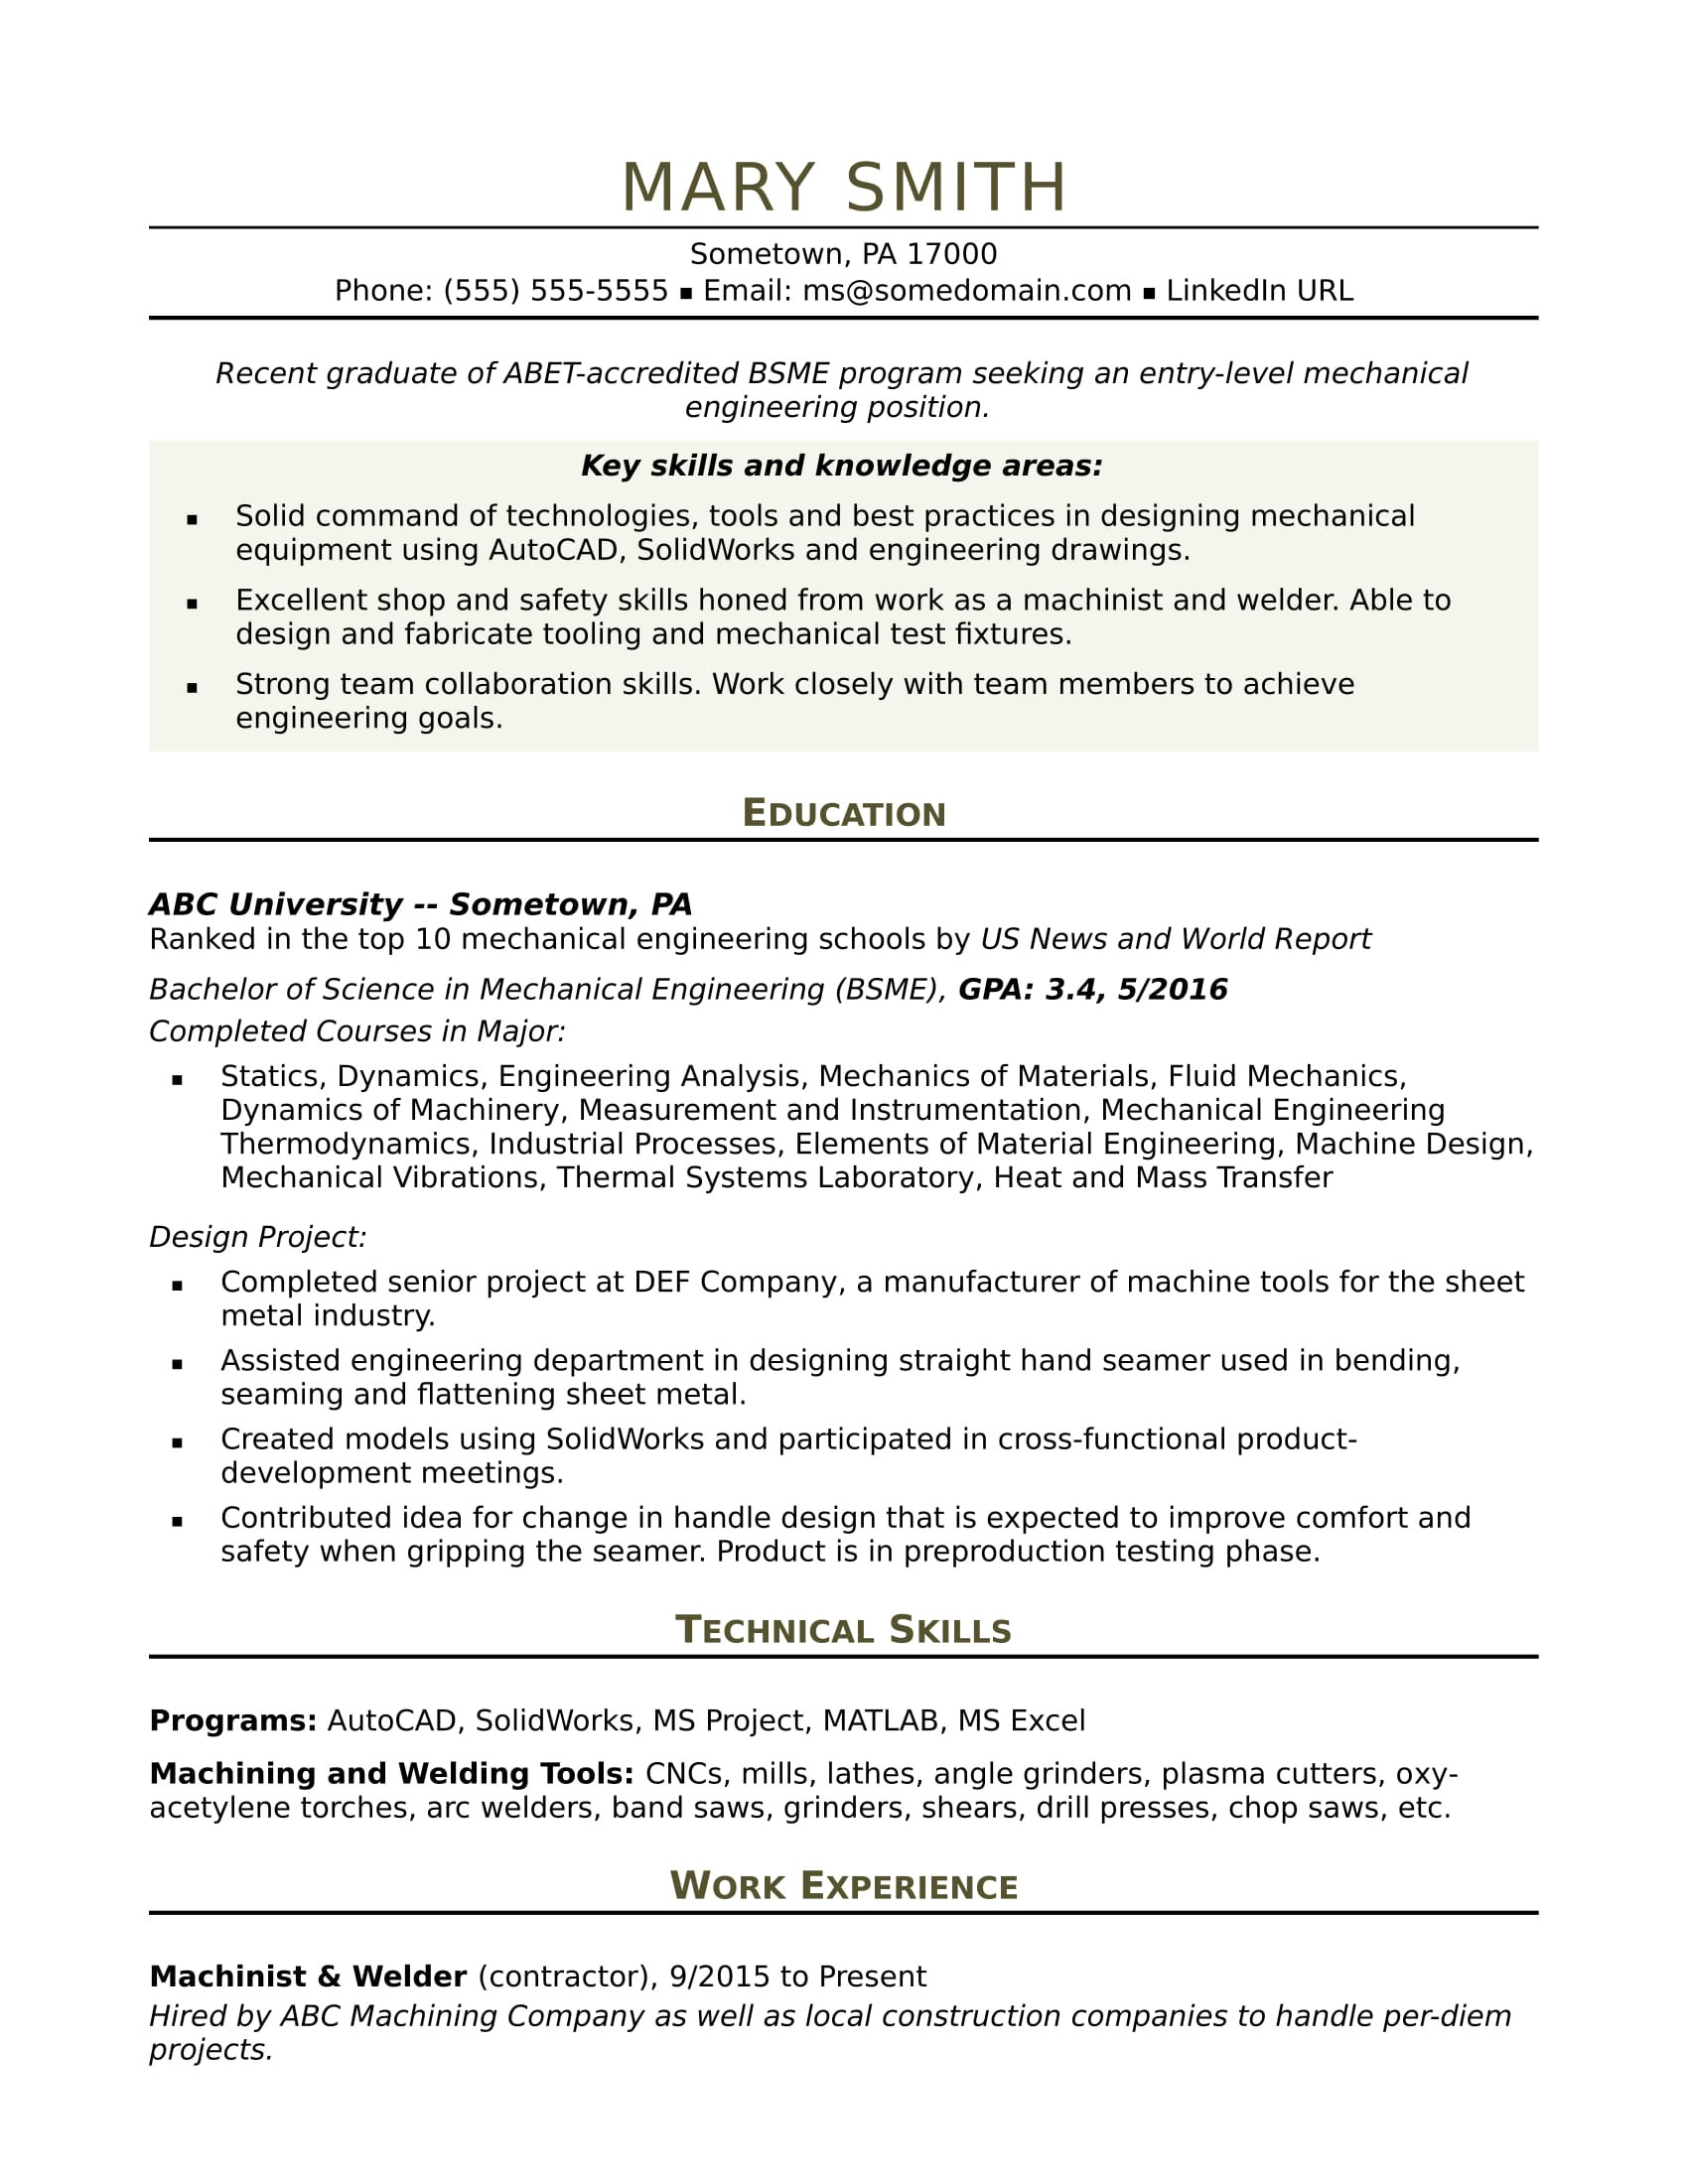 Sample Resume Objective Statements for Material Science Graduate Student Mechanical Engineer Resume: Entry-level Monster.com